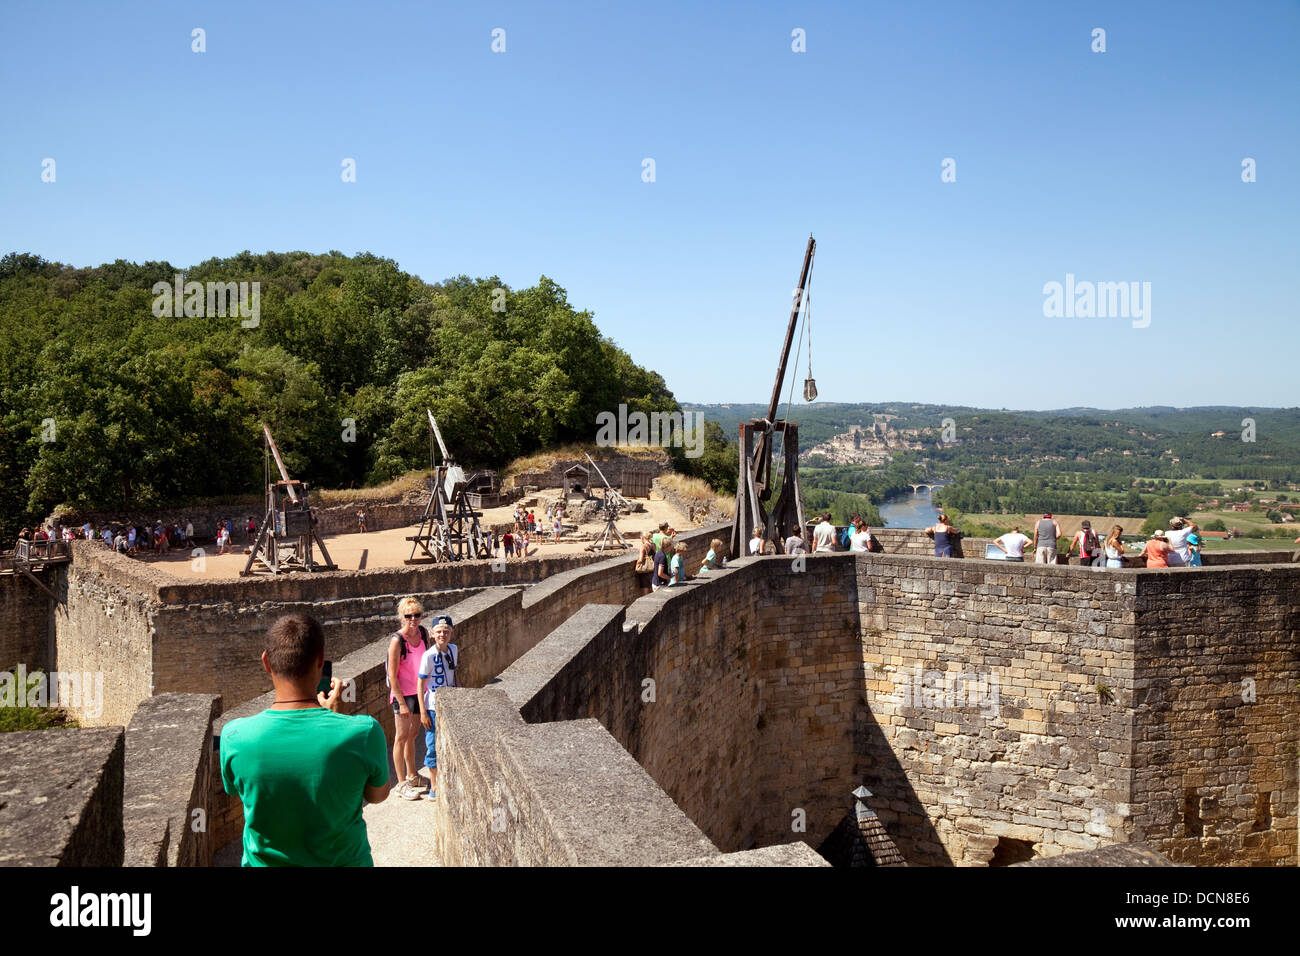 Tourists at the Museum of medieval Warfare looking at medieval weapons, Chateau ( castle ) of Castelnaud-la-Chapelle, the Dordogne, France, Europe Stock Photo